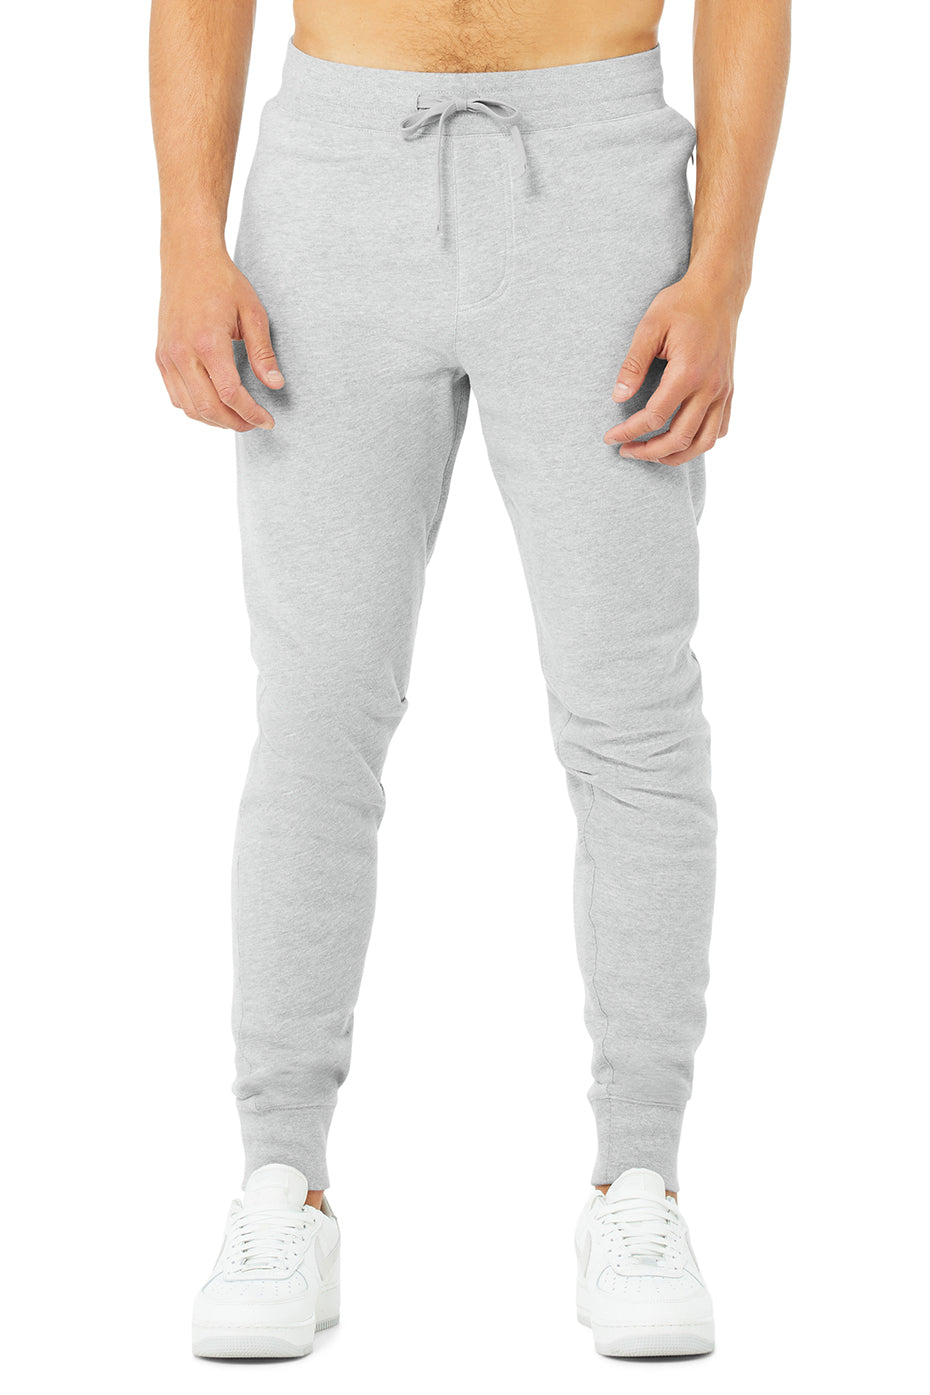 The accolade sweatpants from @ALO, LLC are the BEST!! #aloyoga #aloyog